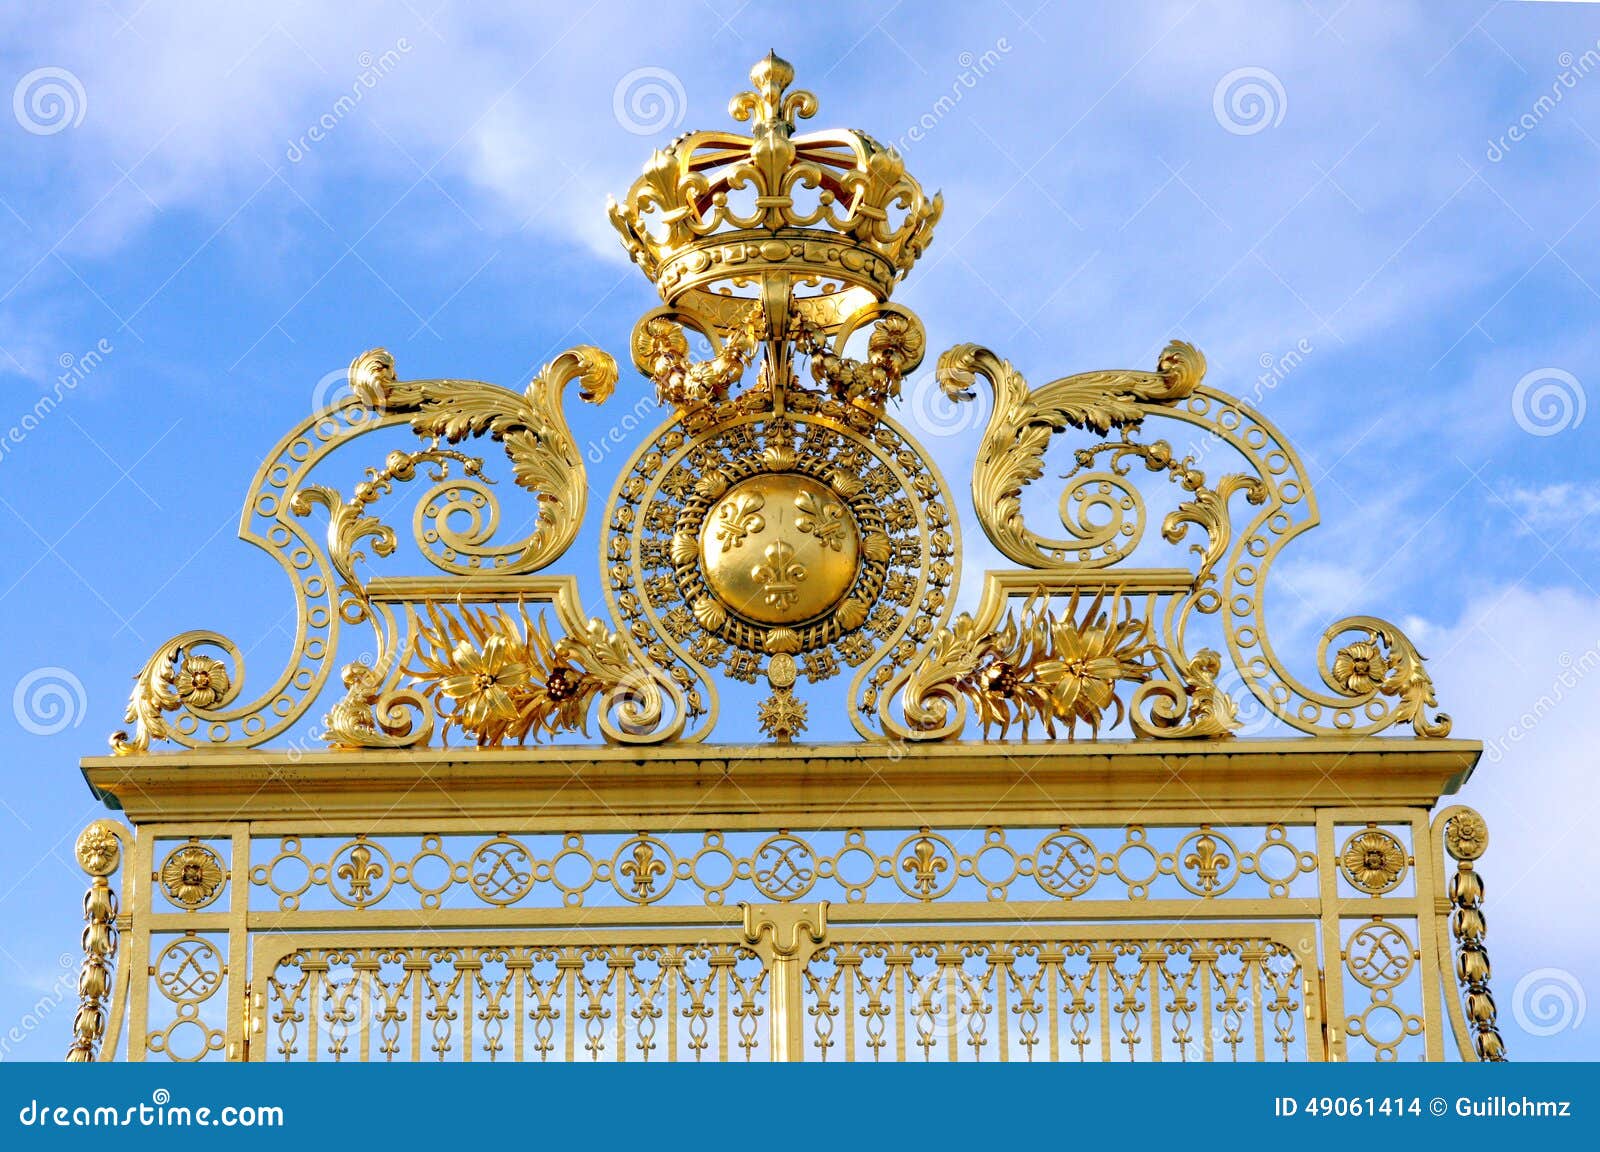 Gold Gate - Palace Of Versailles Stock Photo - Image: 49061414